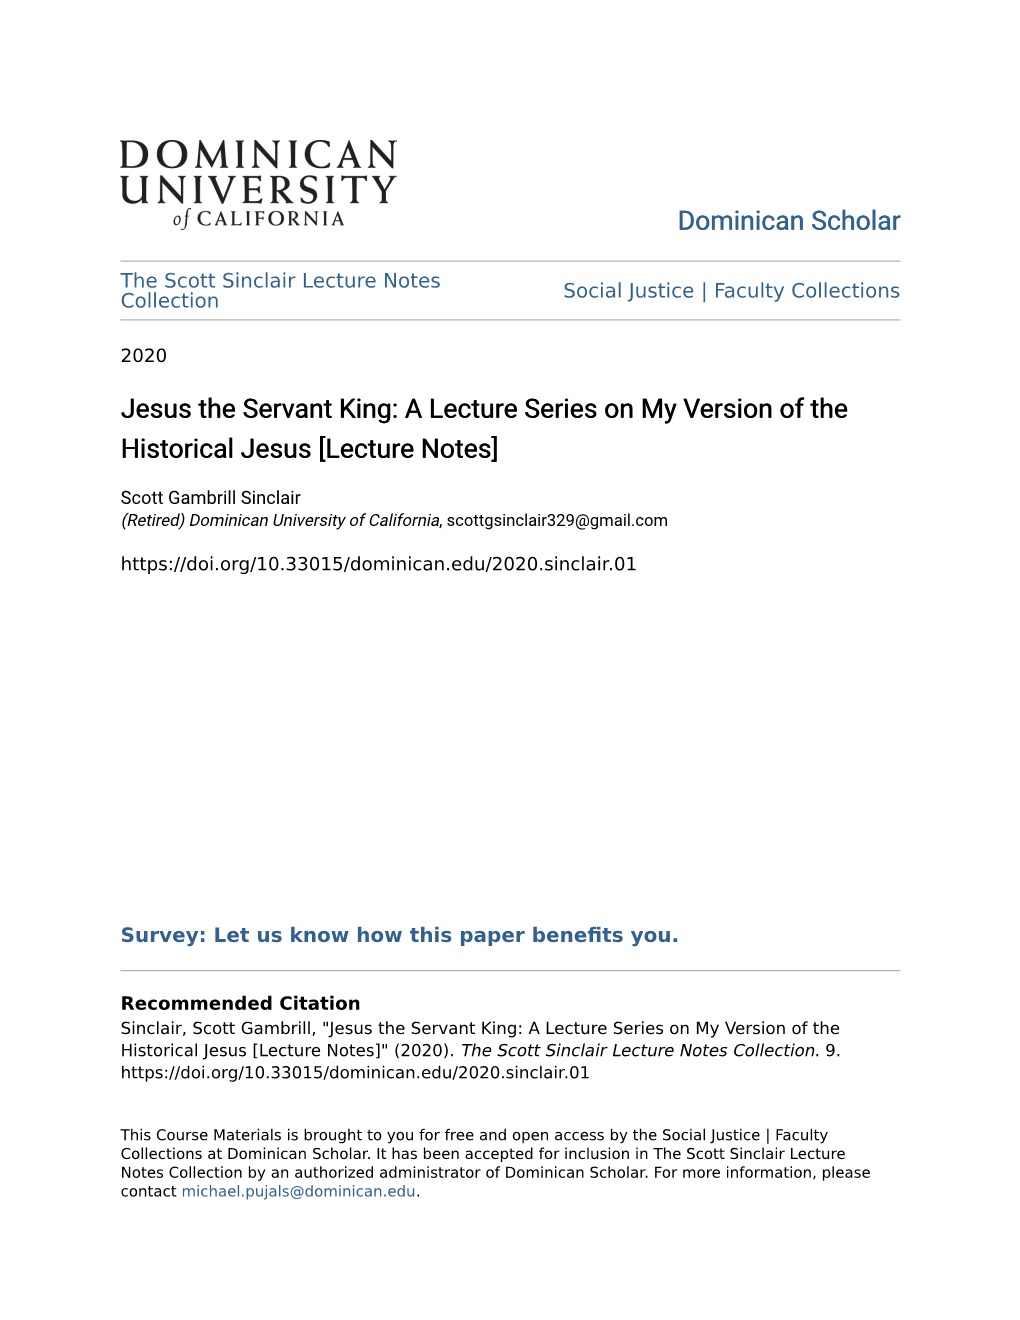 Jesus the Servant King: a Lecture Series on My Version of the Historical Jesus [Lecture Notes]